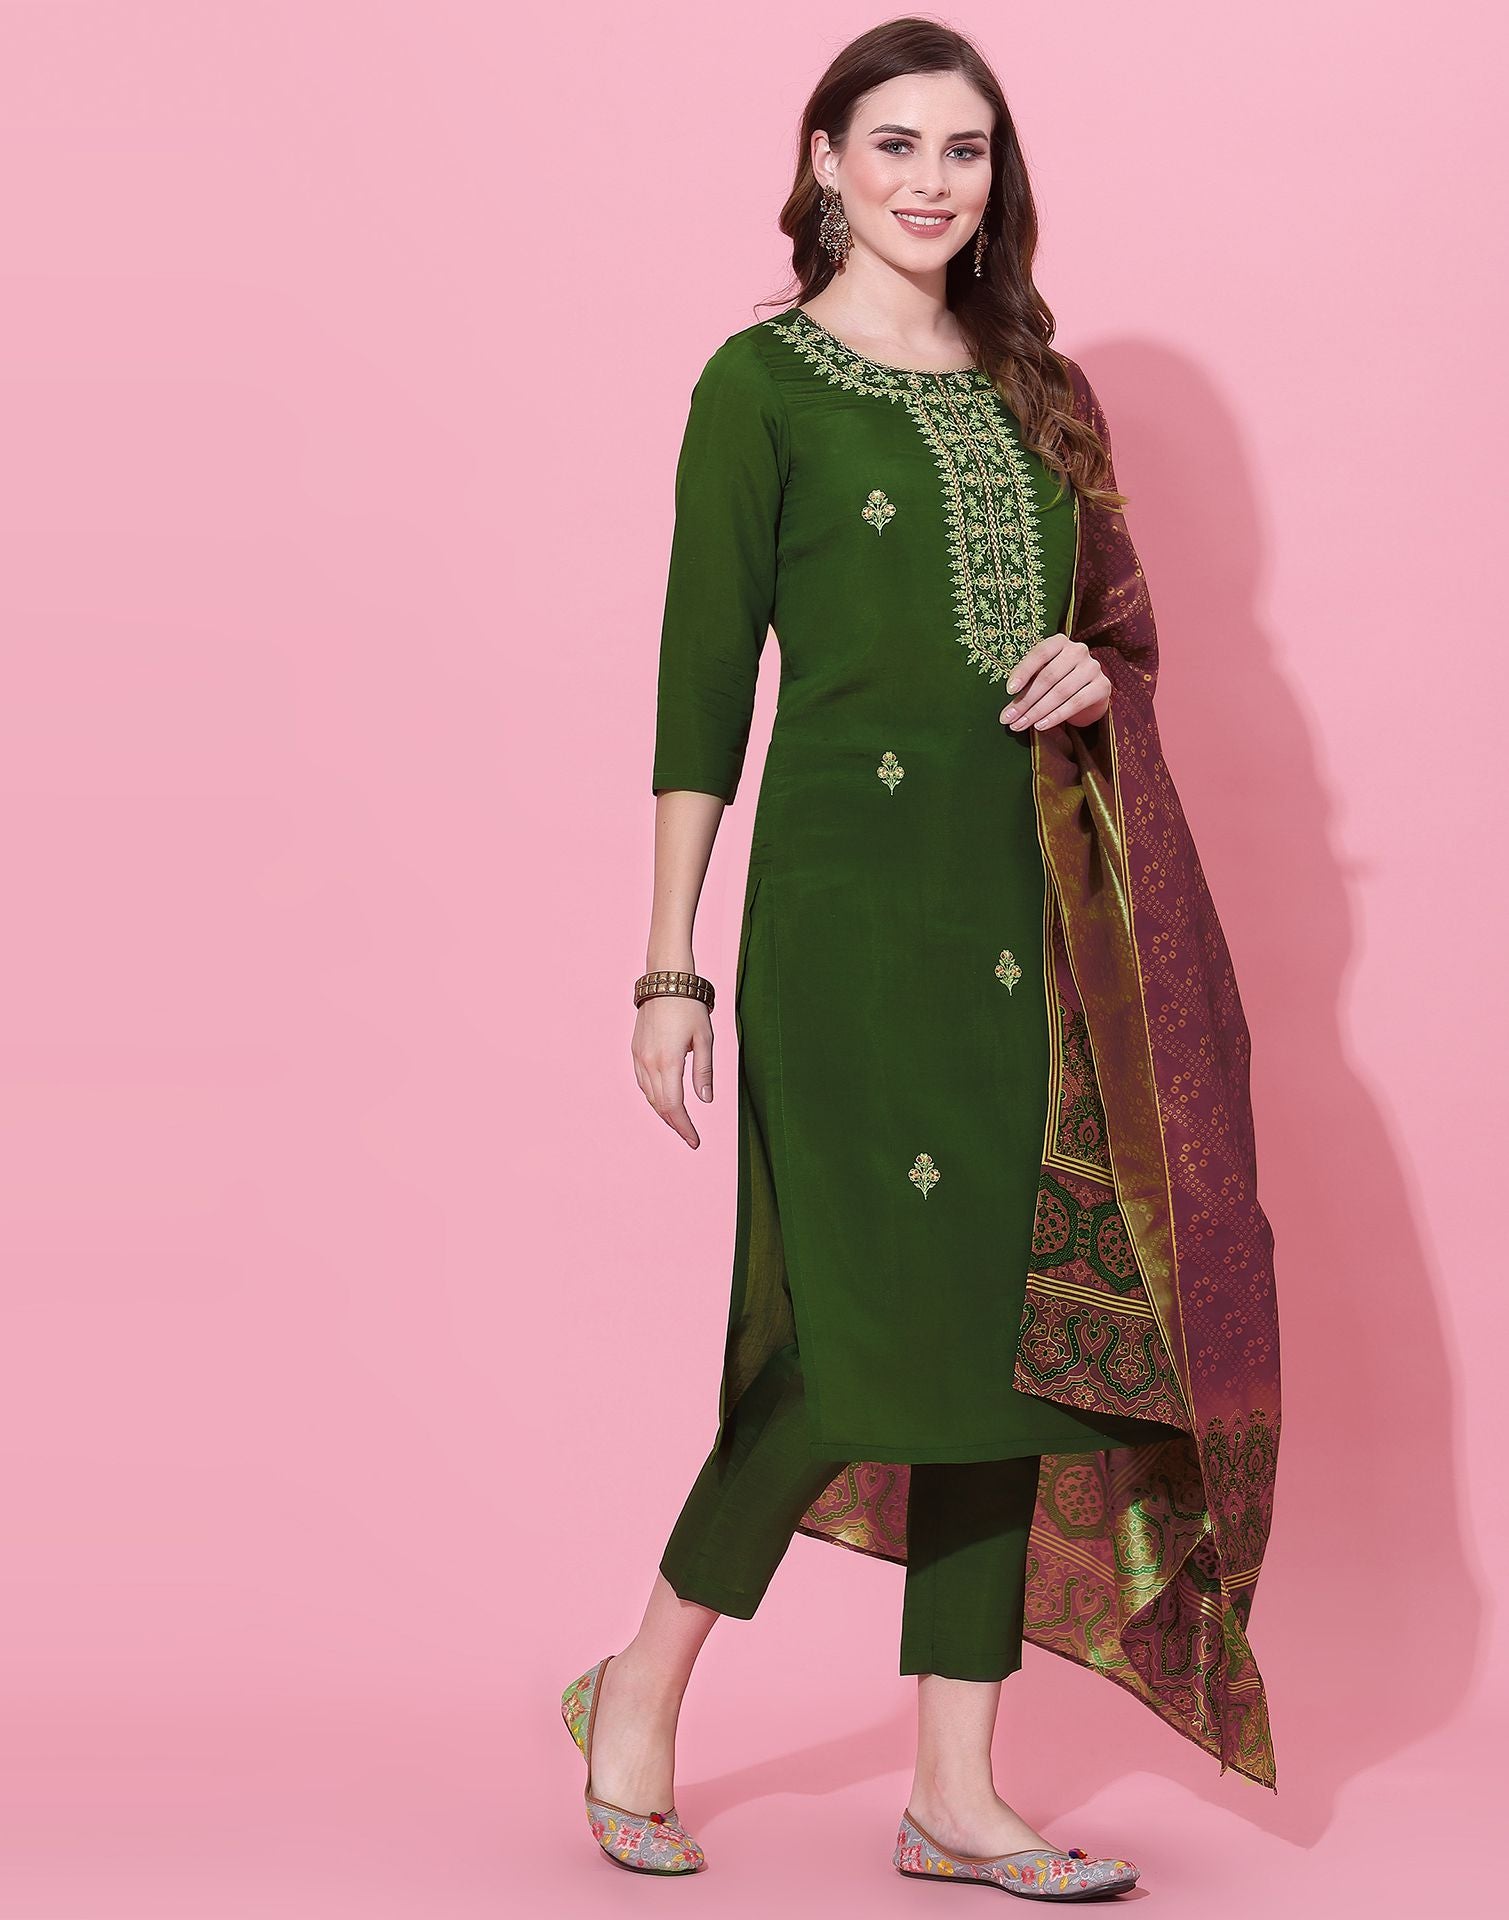 Green Fully Stitched Designer Cotton Kurti For Ladies at Best Price in  Nashik | Disha Collections